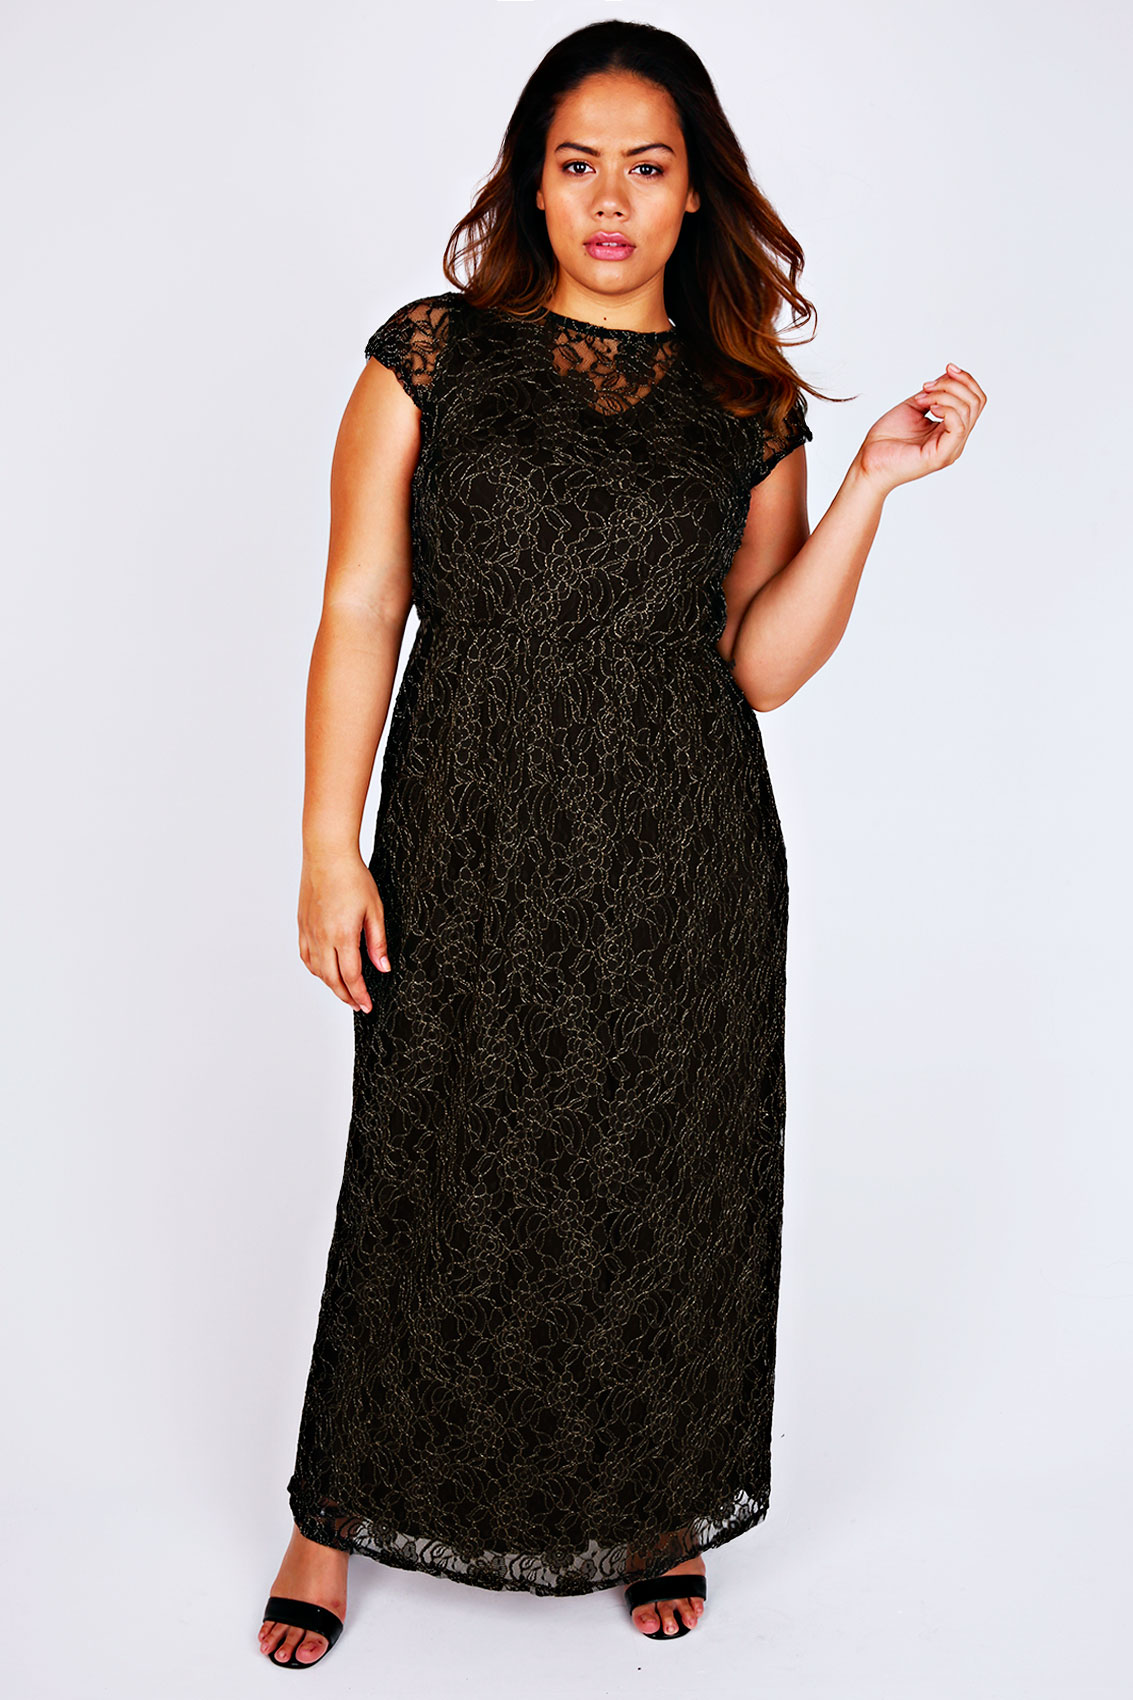 Black & Gold Maxi Dress With Floral Lace Overlay Plus Size 14 to 32